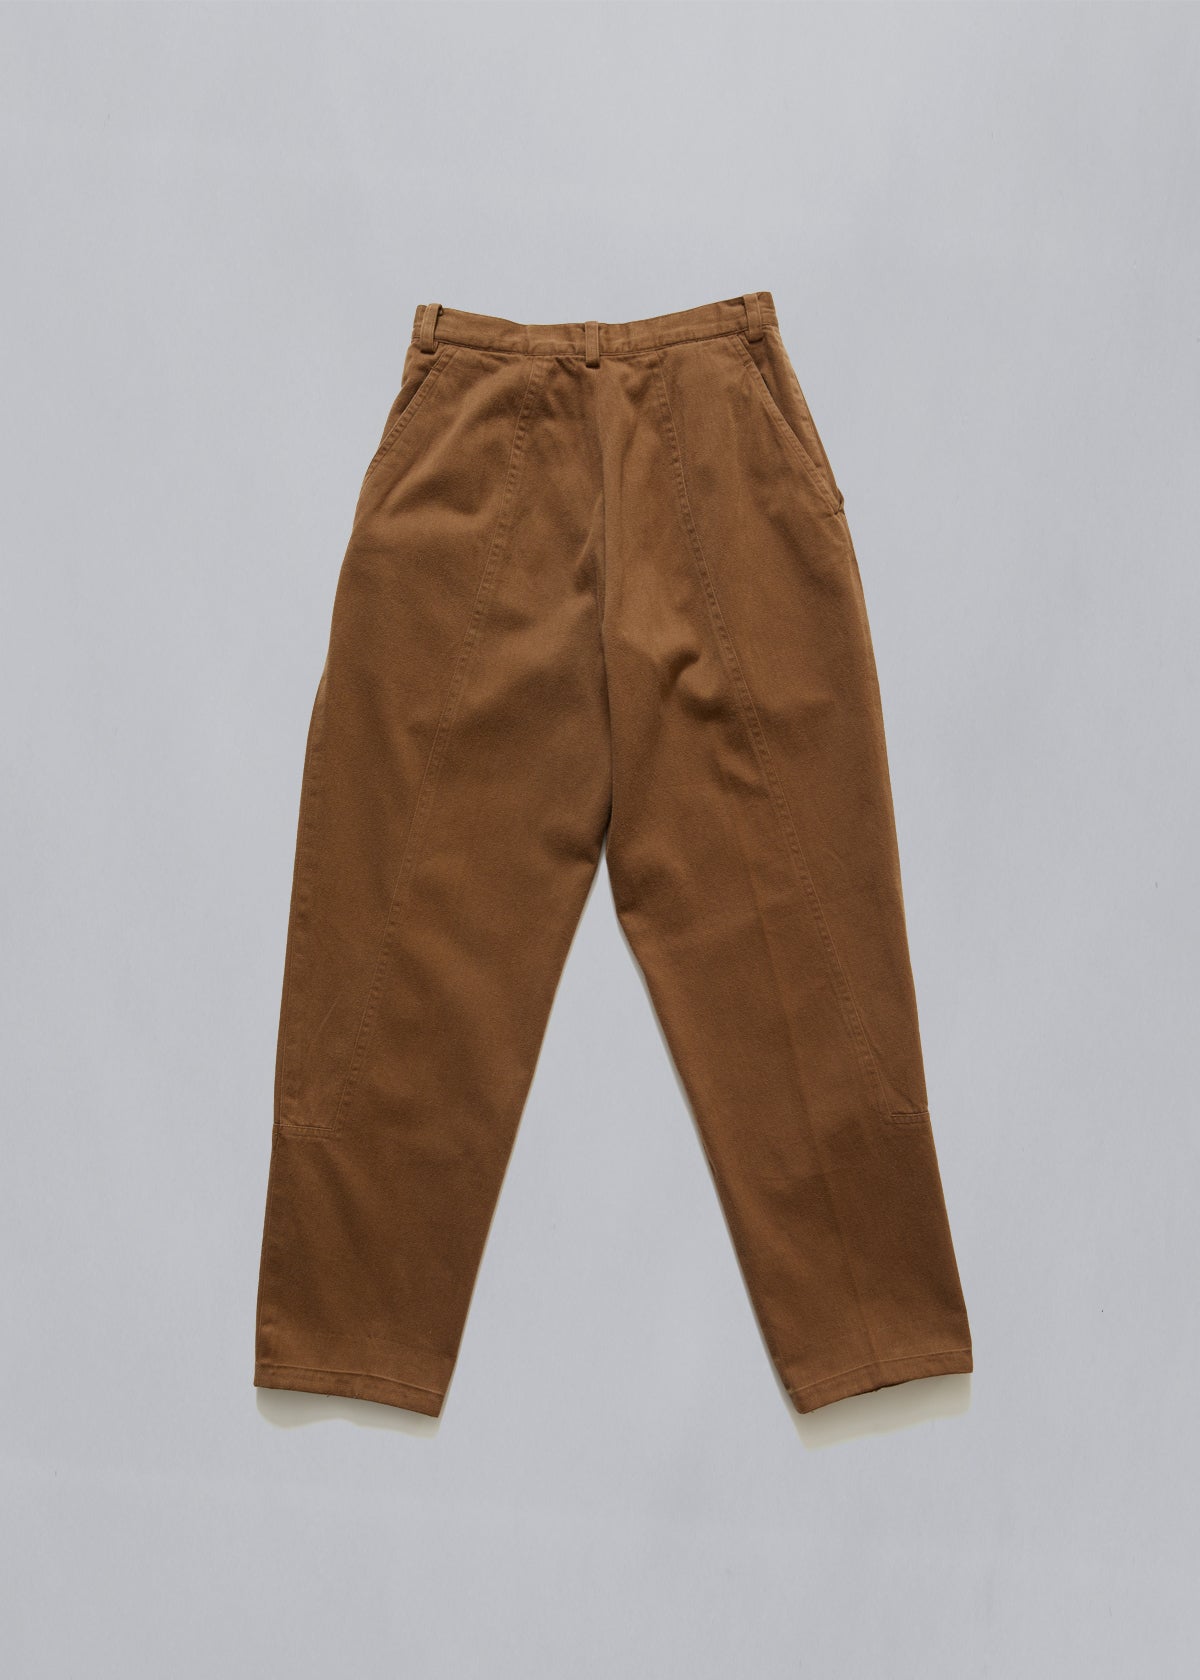 Camel Double Face Cotton Pleated Trousers 1980's - Small